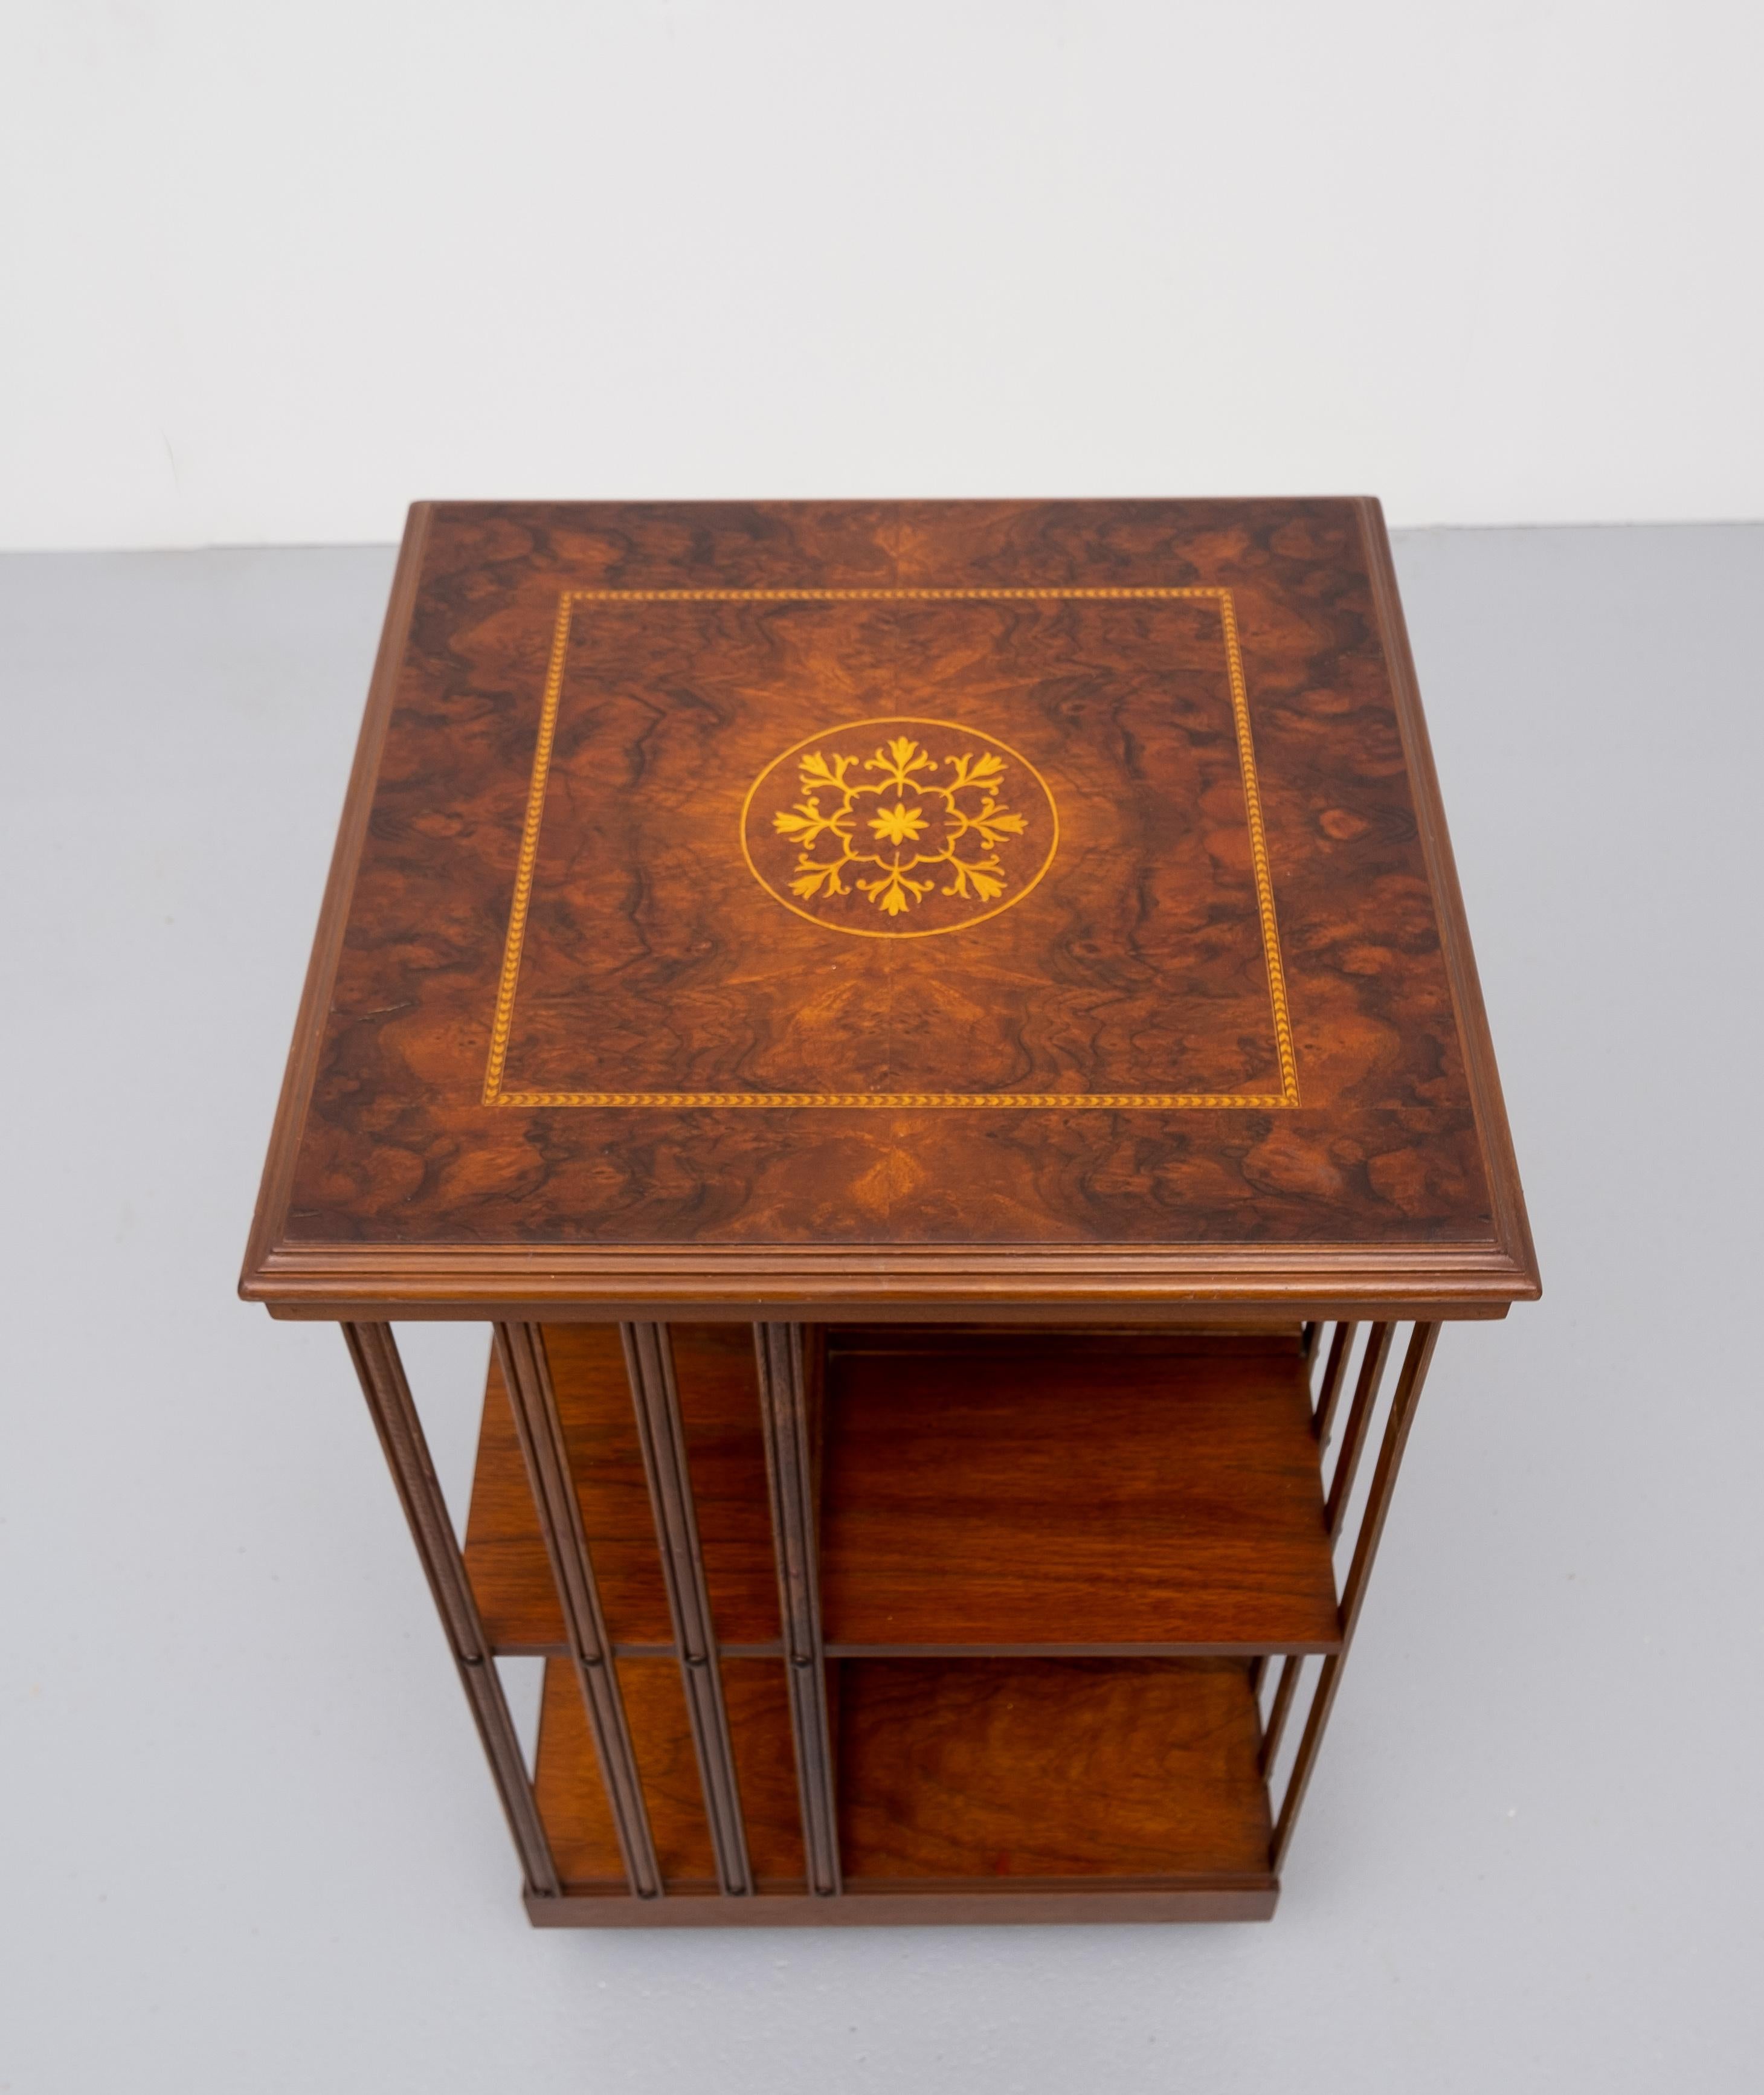 Beautiful burr walnut Sheraton inlaid revolving bookcases side table sized. Very nice looking
revolving bookcase.
  